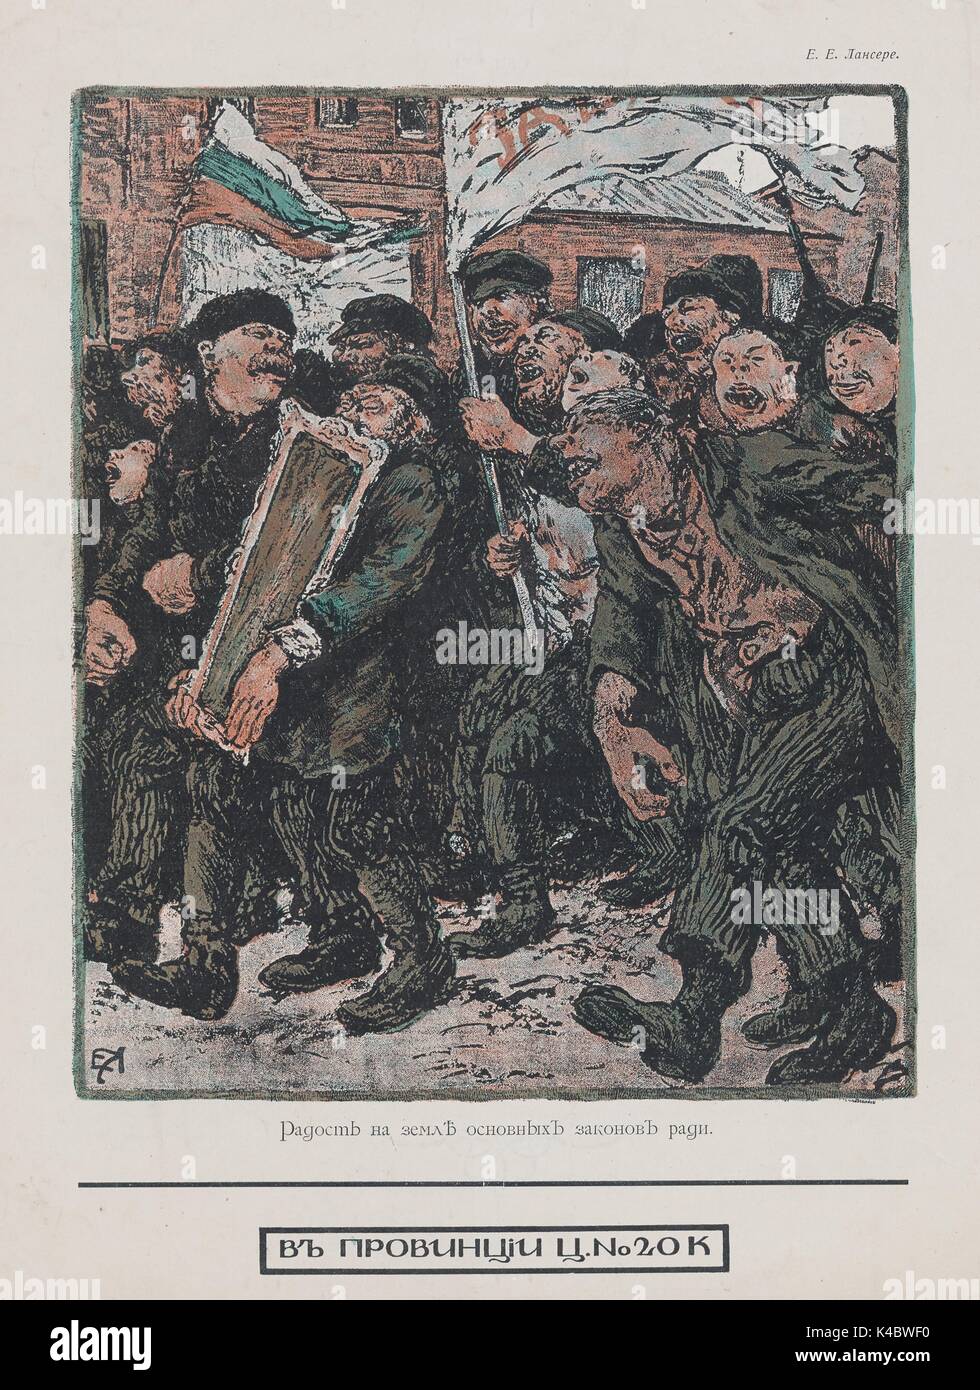 Illustration of people jubilantly marching in the streets and holding banners, with the title Joy on Earth for the Sake of Basic Laws, from the Russian satirical journal Adskaia Pochta (Infernal Mail), 1906. Stock Photo